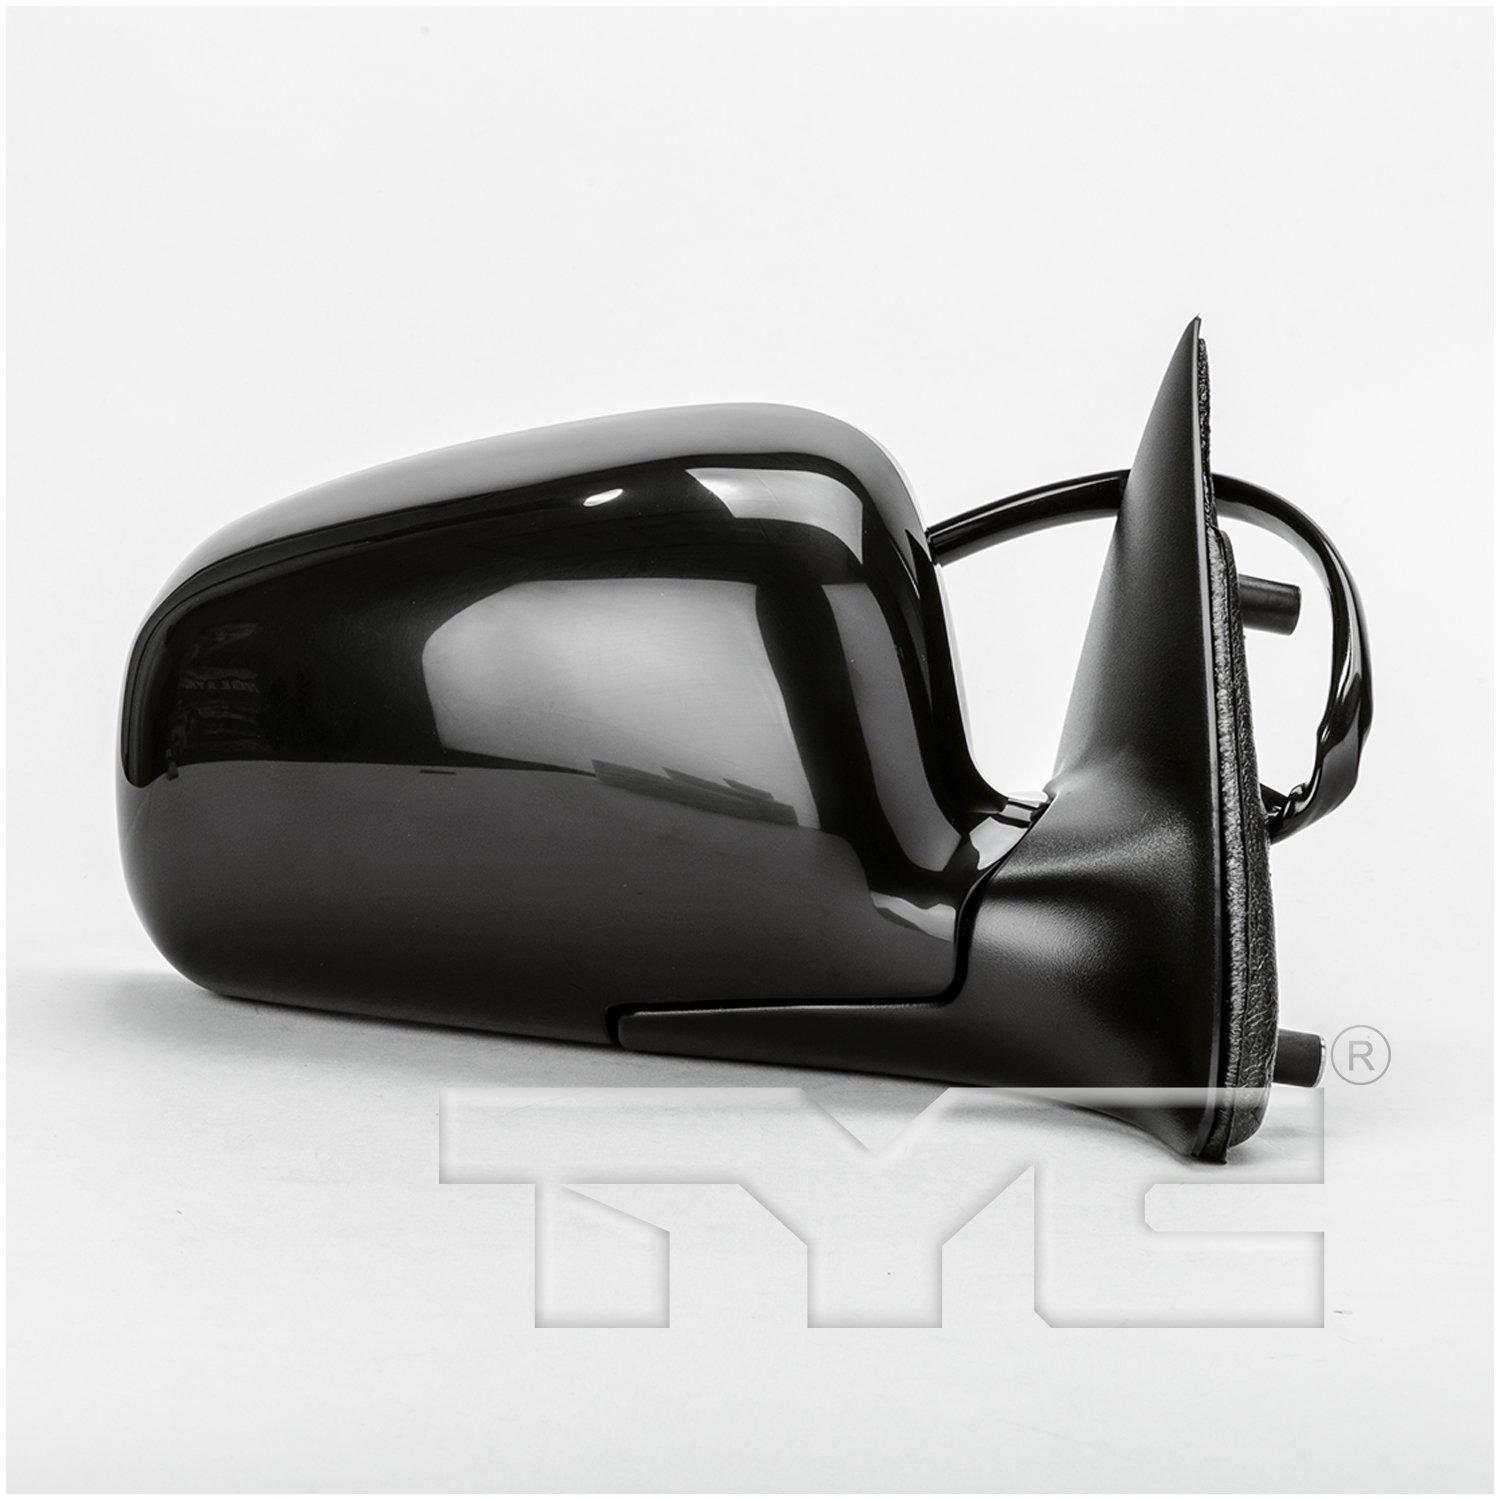 Aftermarket MIRRORS for LINCOLN - TOWN CAR, TOWN CAR,04-08,RT Mirror outside rear view